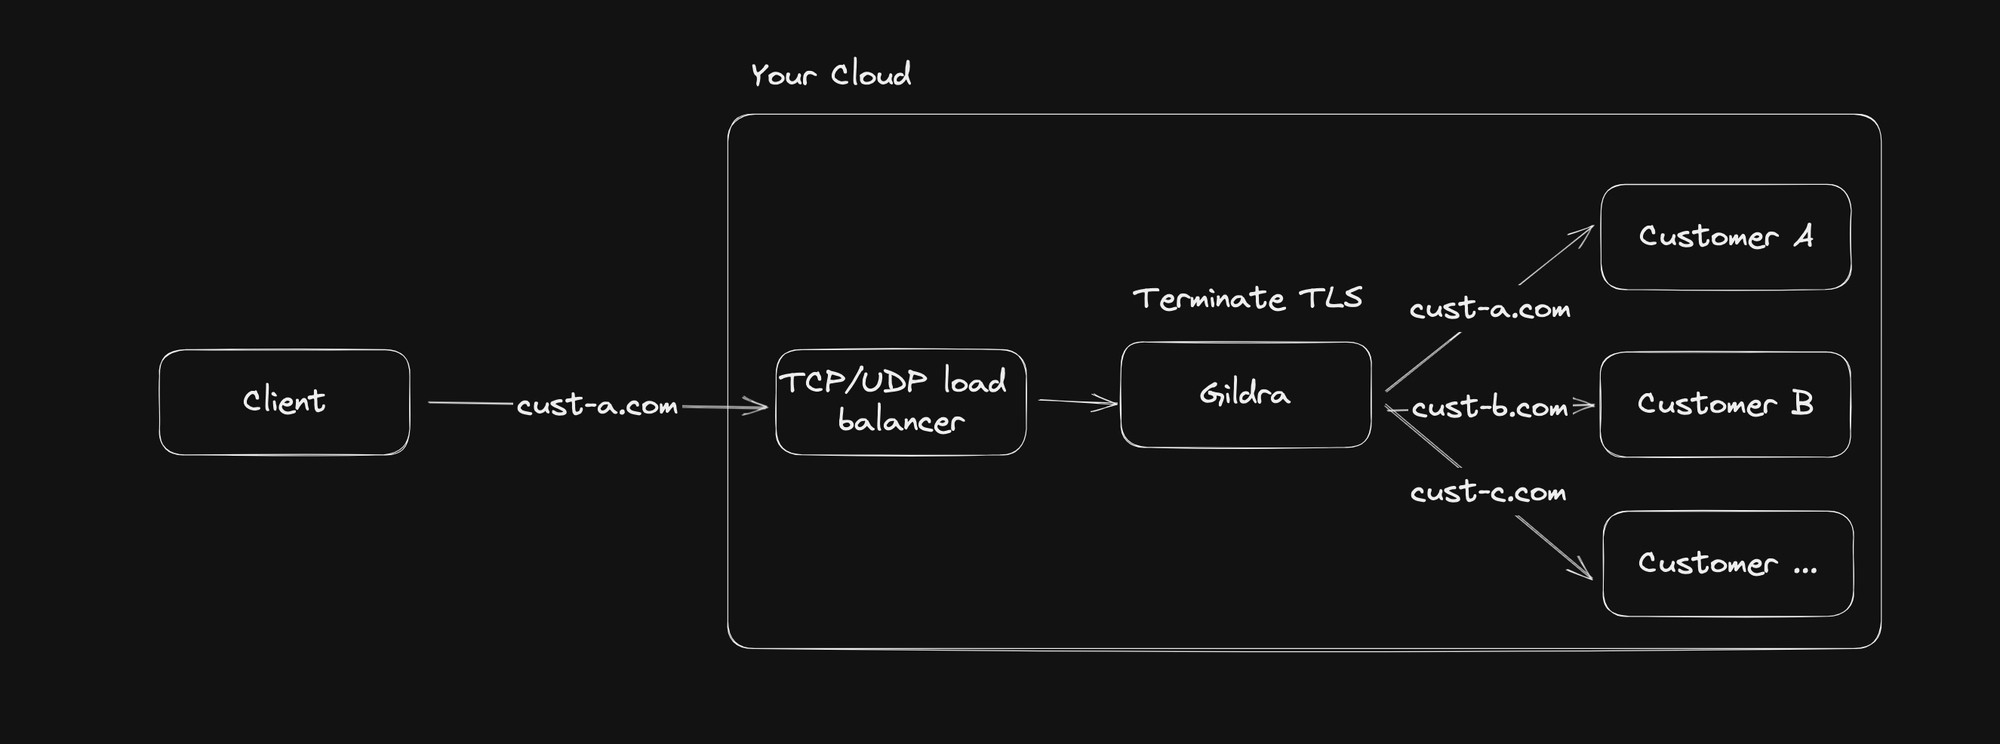 Gildra - TLS Terminating Proxy For Unlimited Domains In Your Cloud